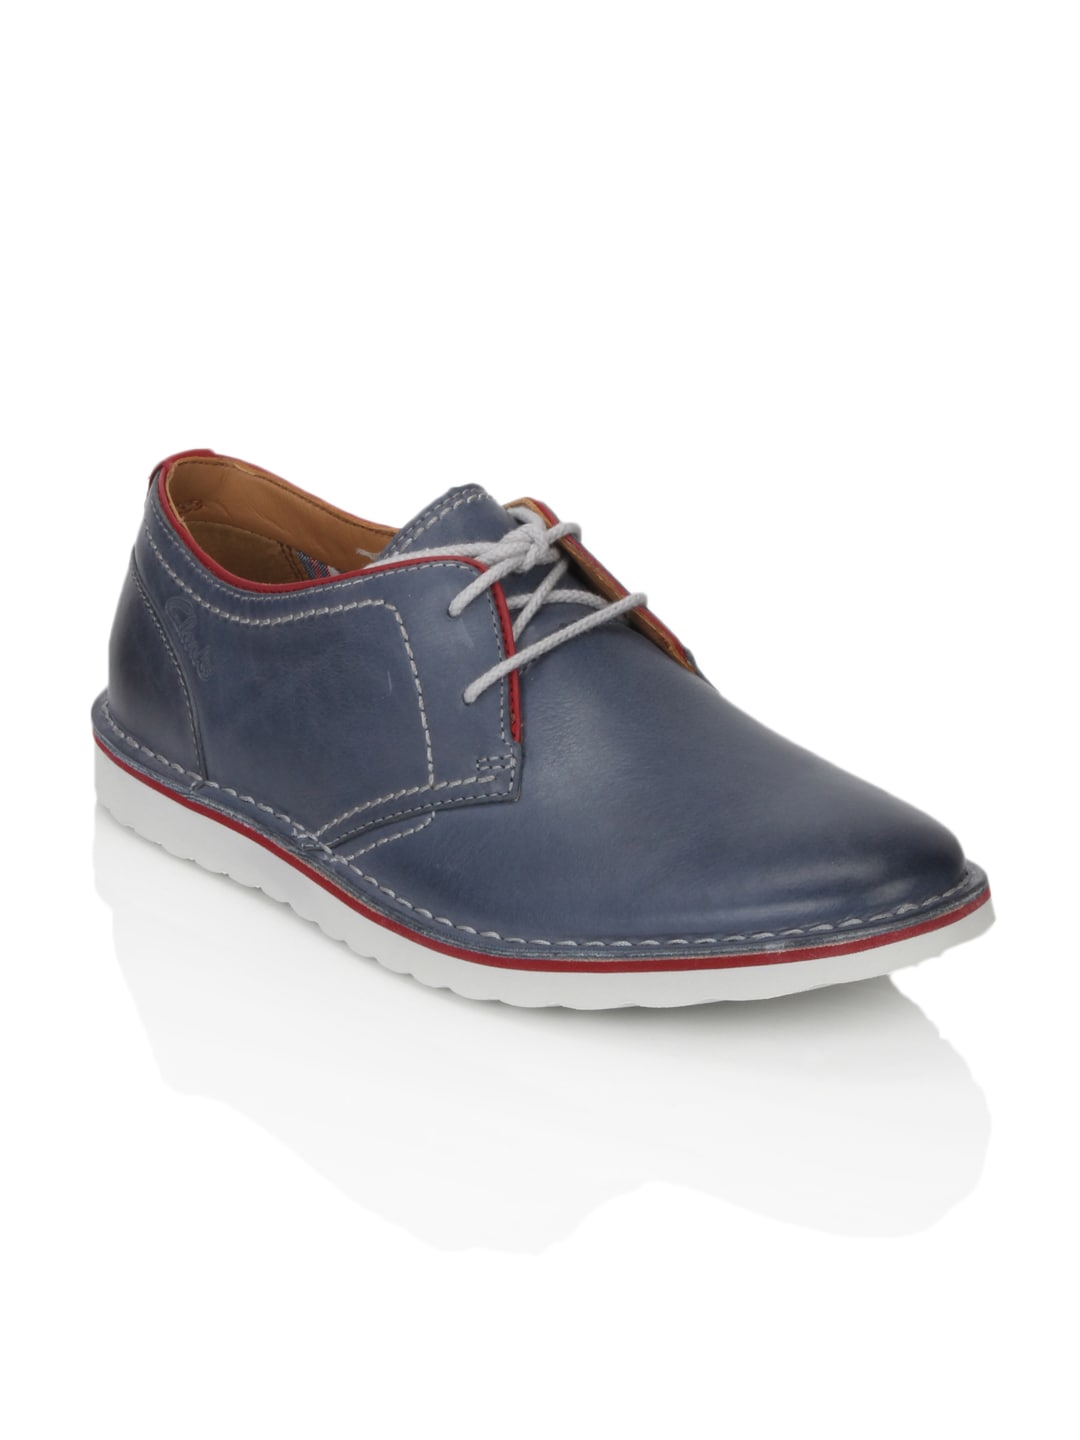 Clarks Men Manor Hall Leather Blue Shoes